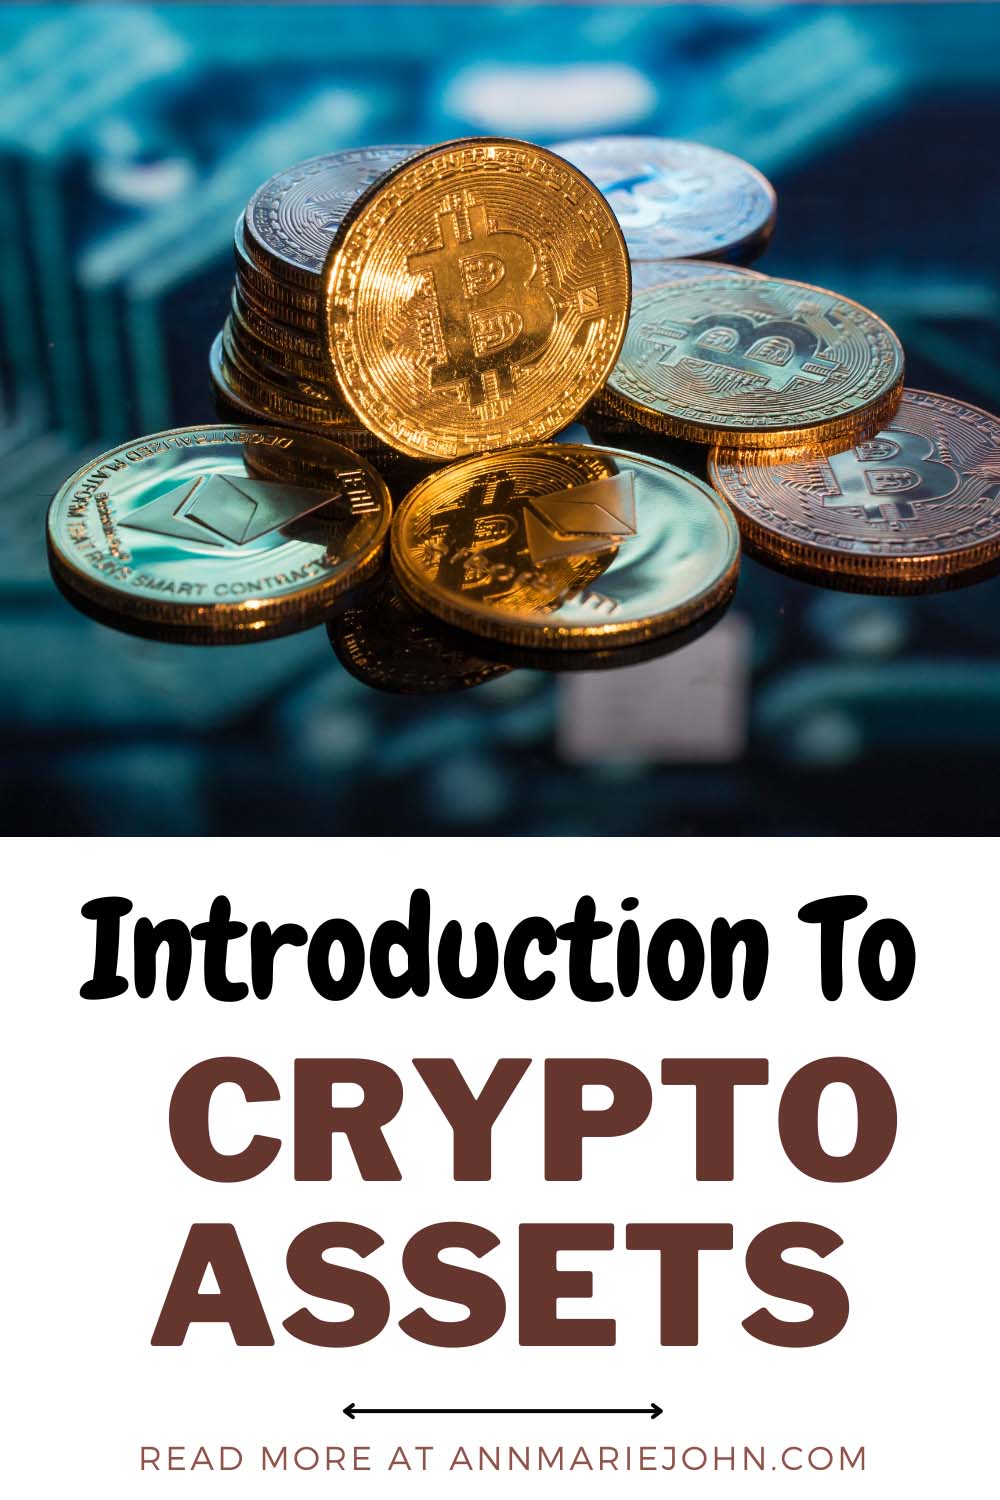 Introduction to Crypto Assets